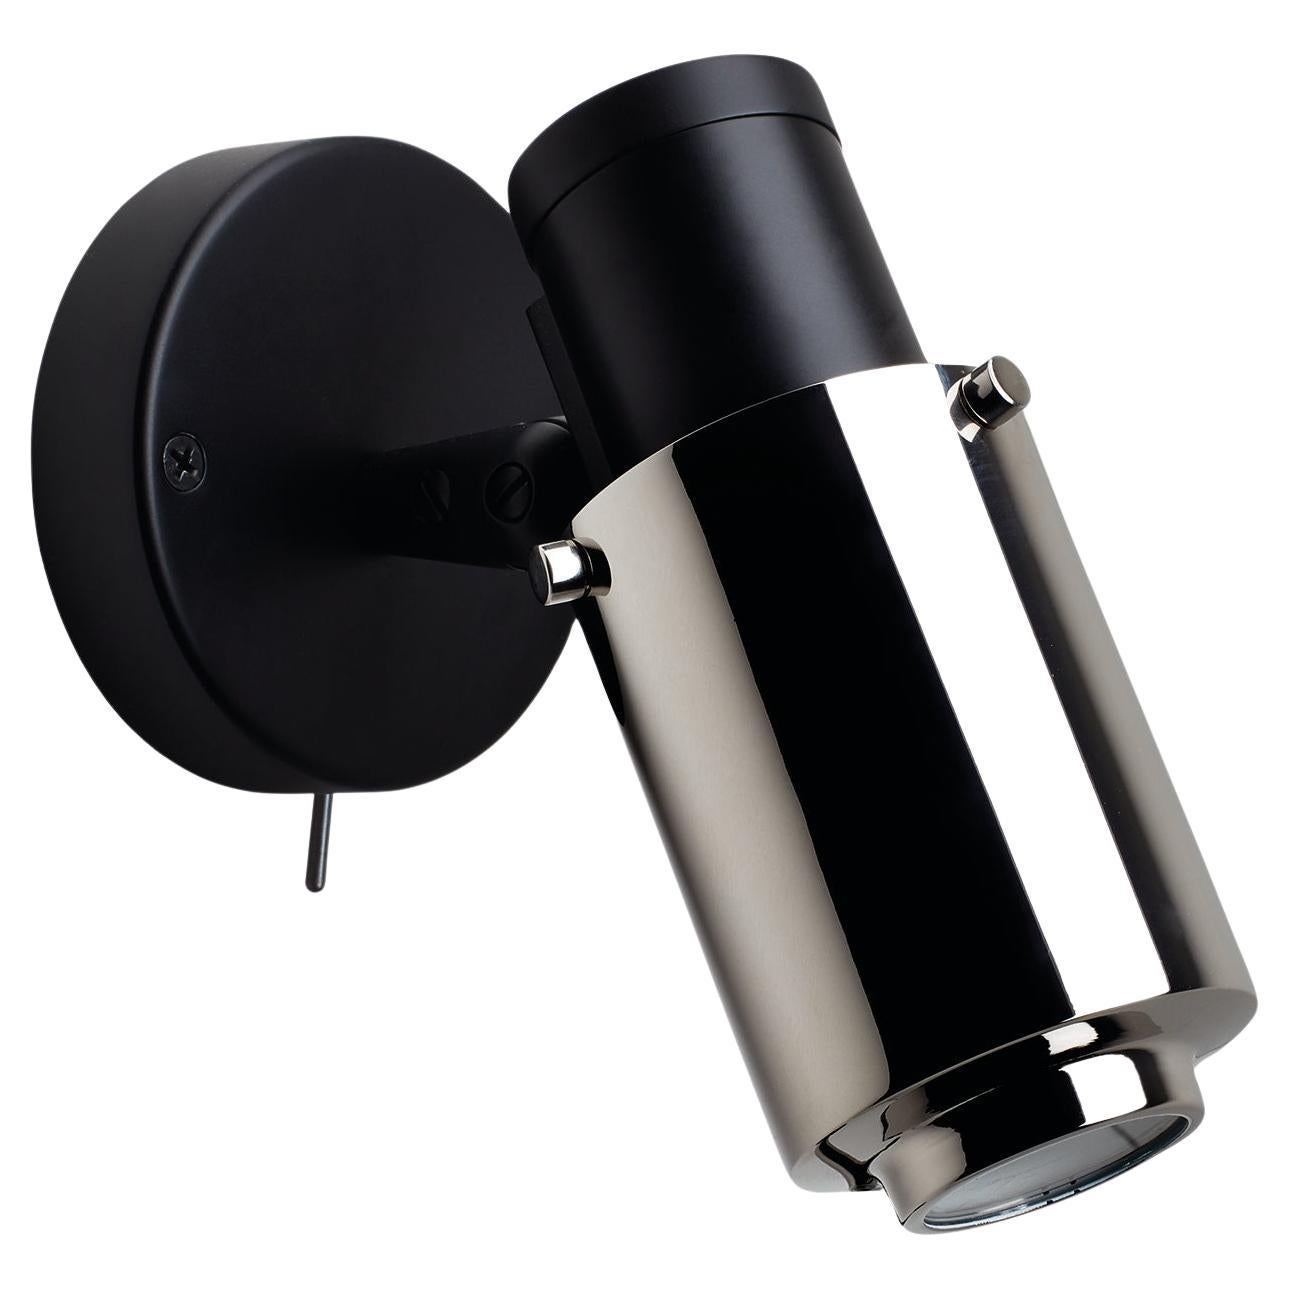 DCW Editions Biny Spot Bulb Wall Lamp in Black-Nickel Steel without Stick